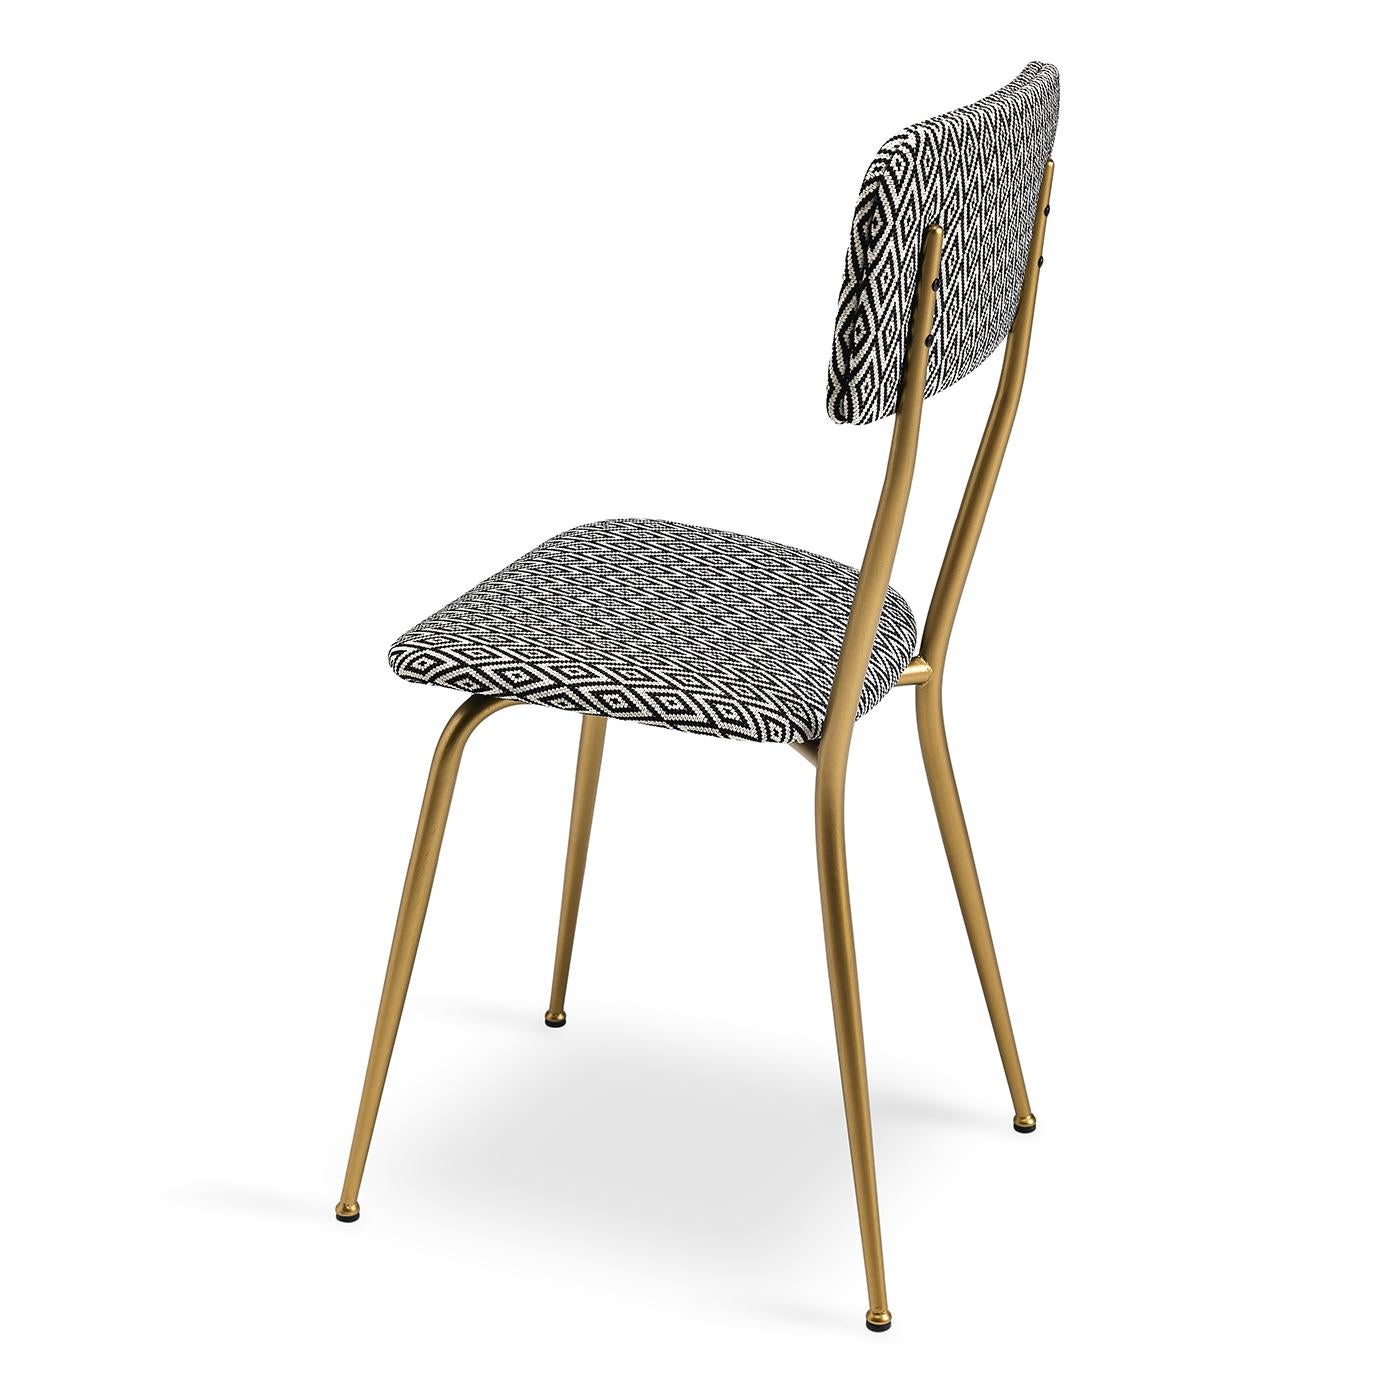 This sophisticated chair sports a sleek metal frame with a brushed brass finish. In stark contrast with its understated aesthetic, geometric upholstery covers the padded seat and backrest for a statement effect. Combining comfort, style and